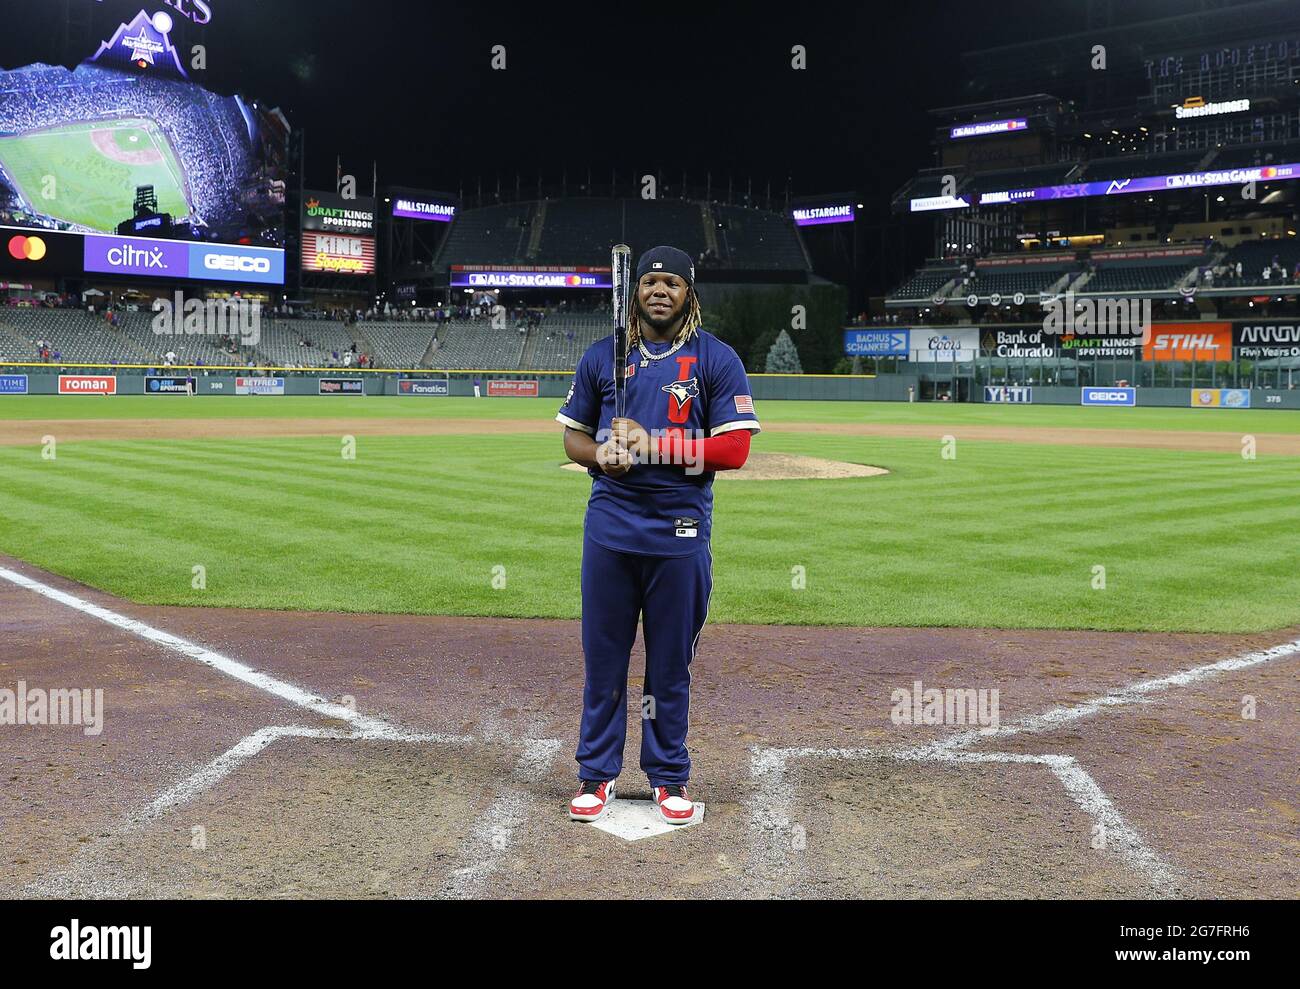 Denver, United States. 13th July, 2021. Toronto Blue Jays first baseman Vladimir Guerrero Jr. holds the trophy after being named the MVP of the 2021 MLB All-Star Game at Coors Field in Denver, Colorado, on Tuesday, July 13, 2021. Photo by Bob Strong/UPI Credit: UPI/Alamy Live News Stock Photo